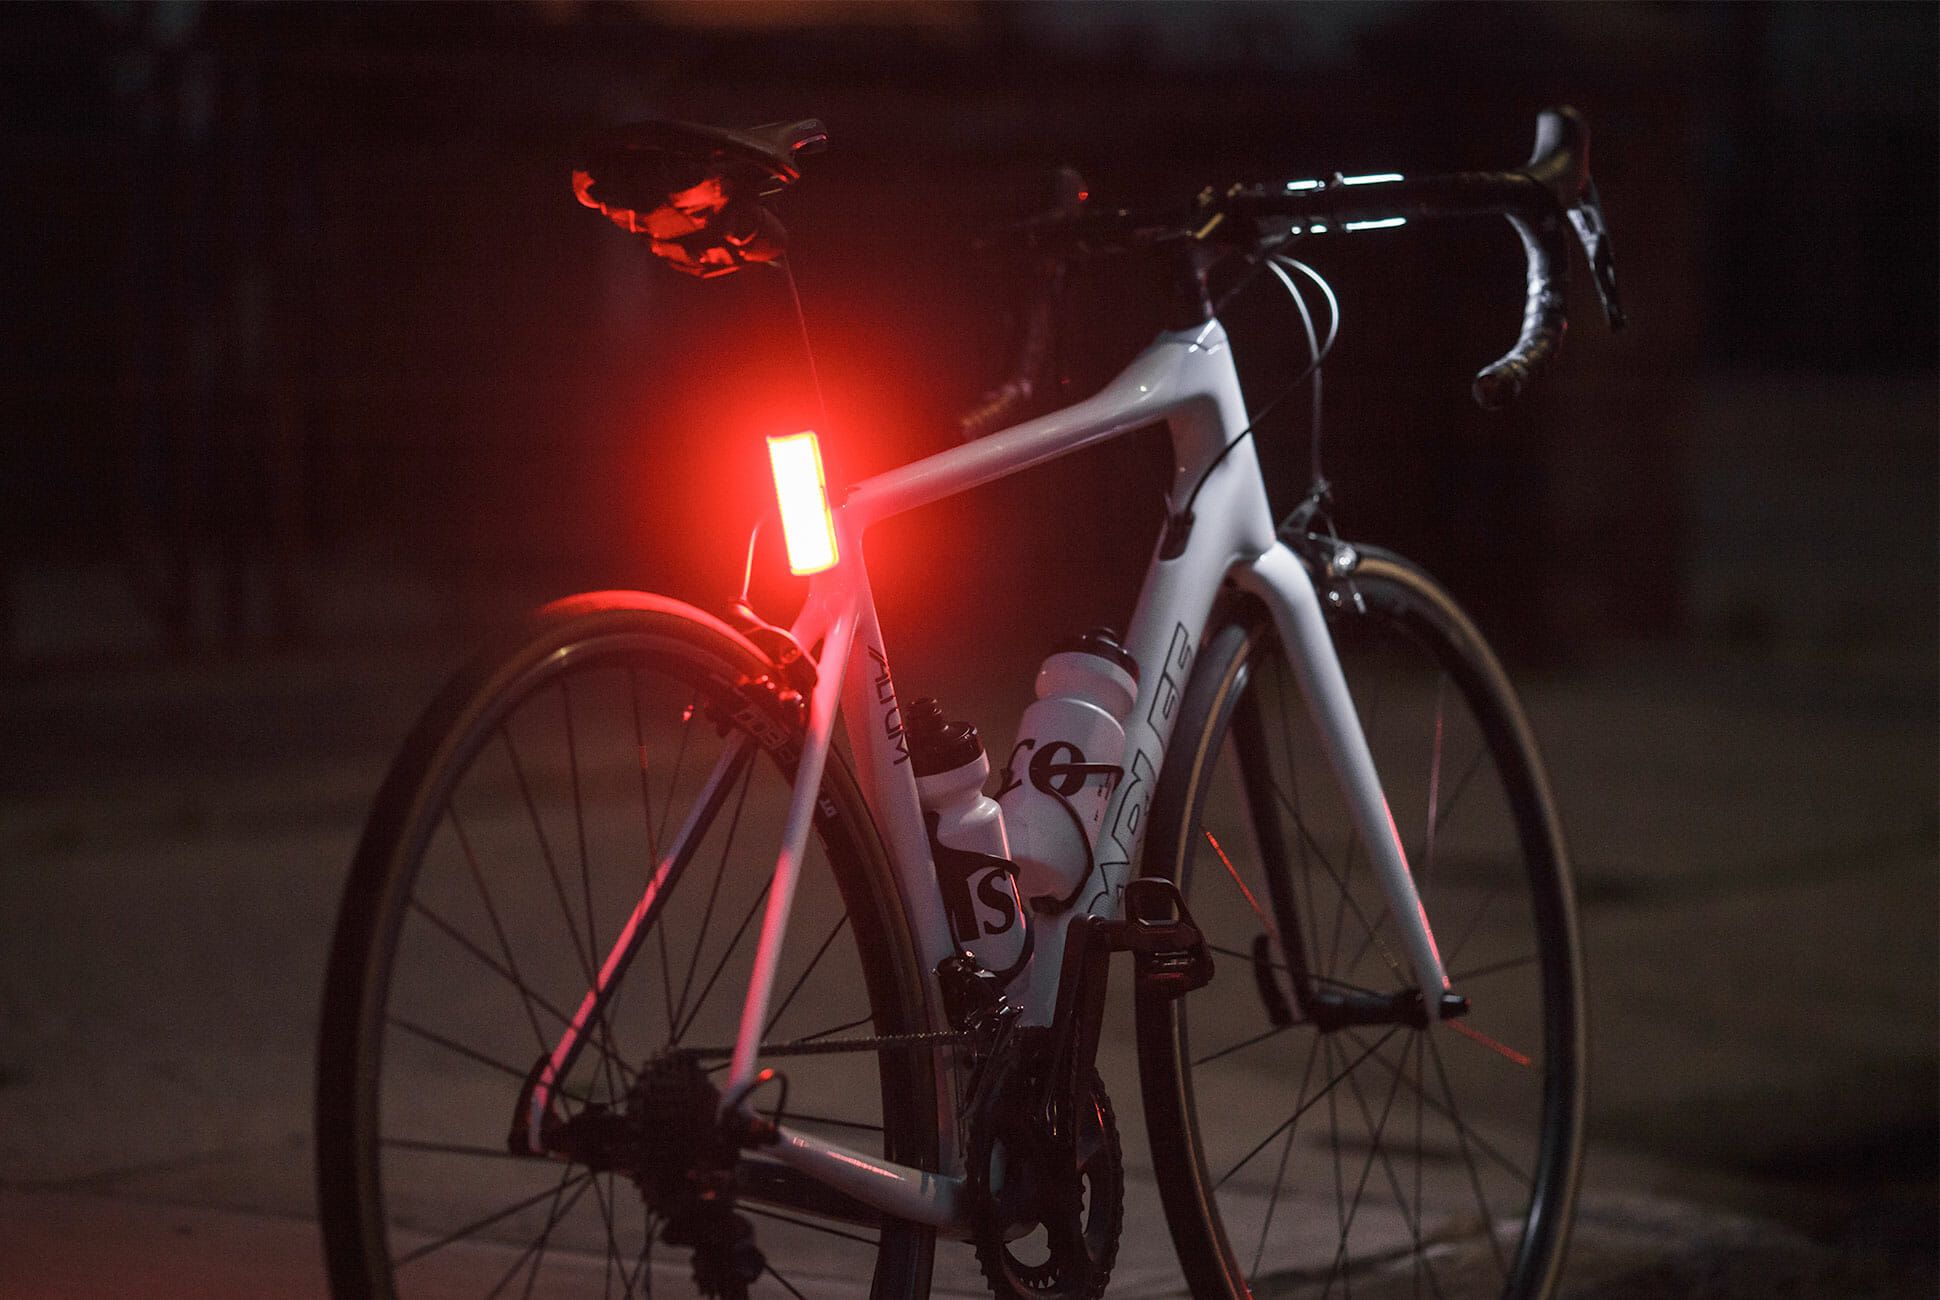 The Bike Lights For Commuting